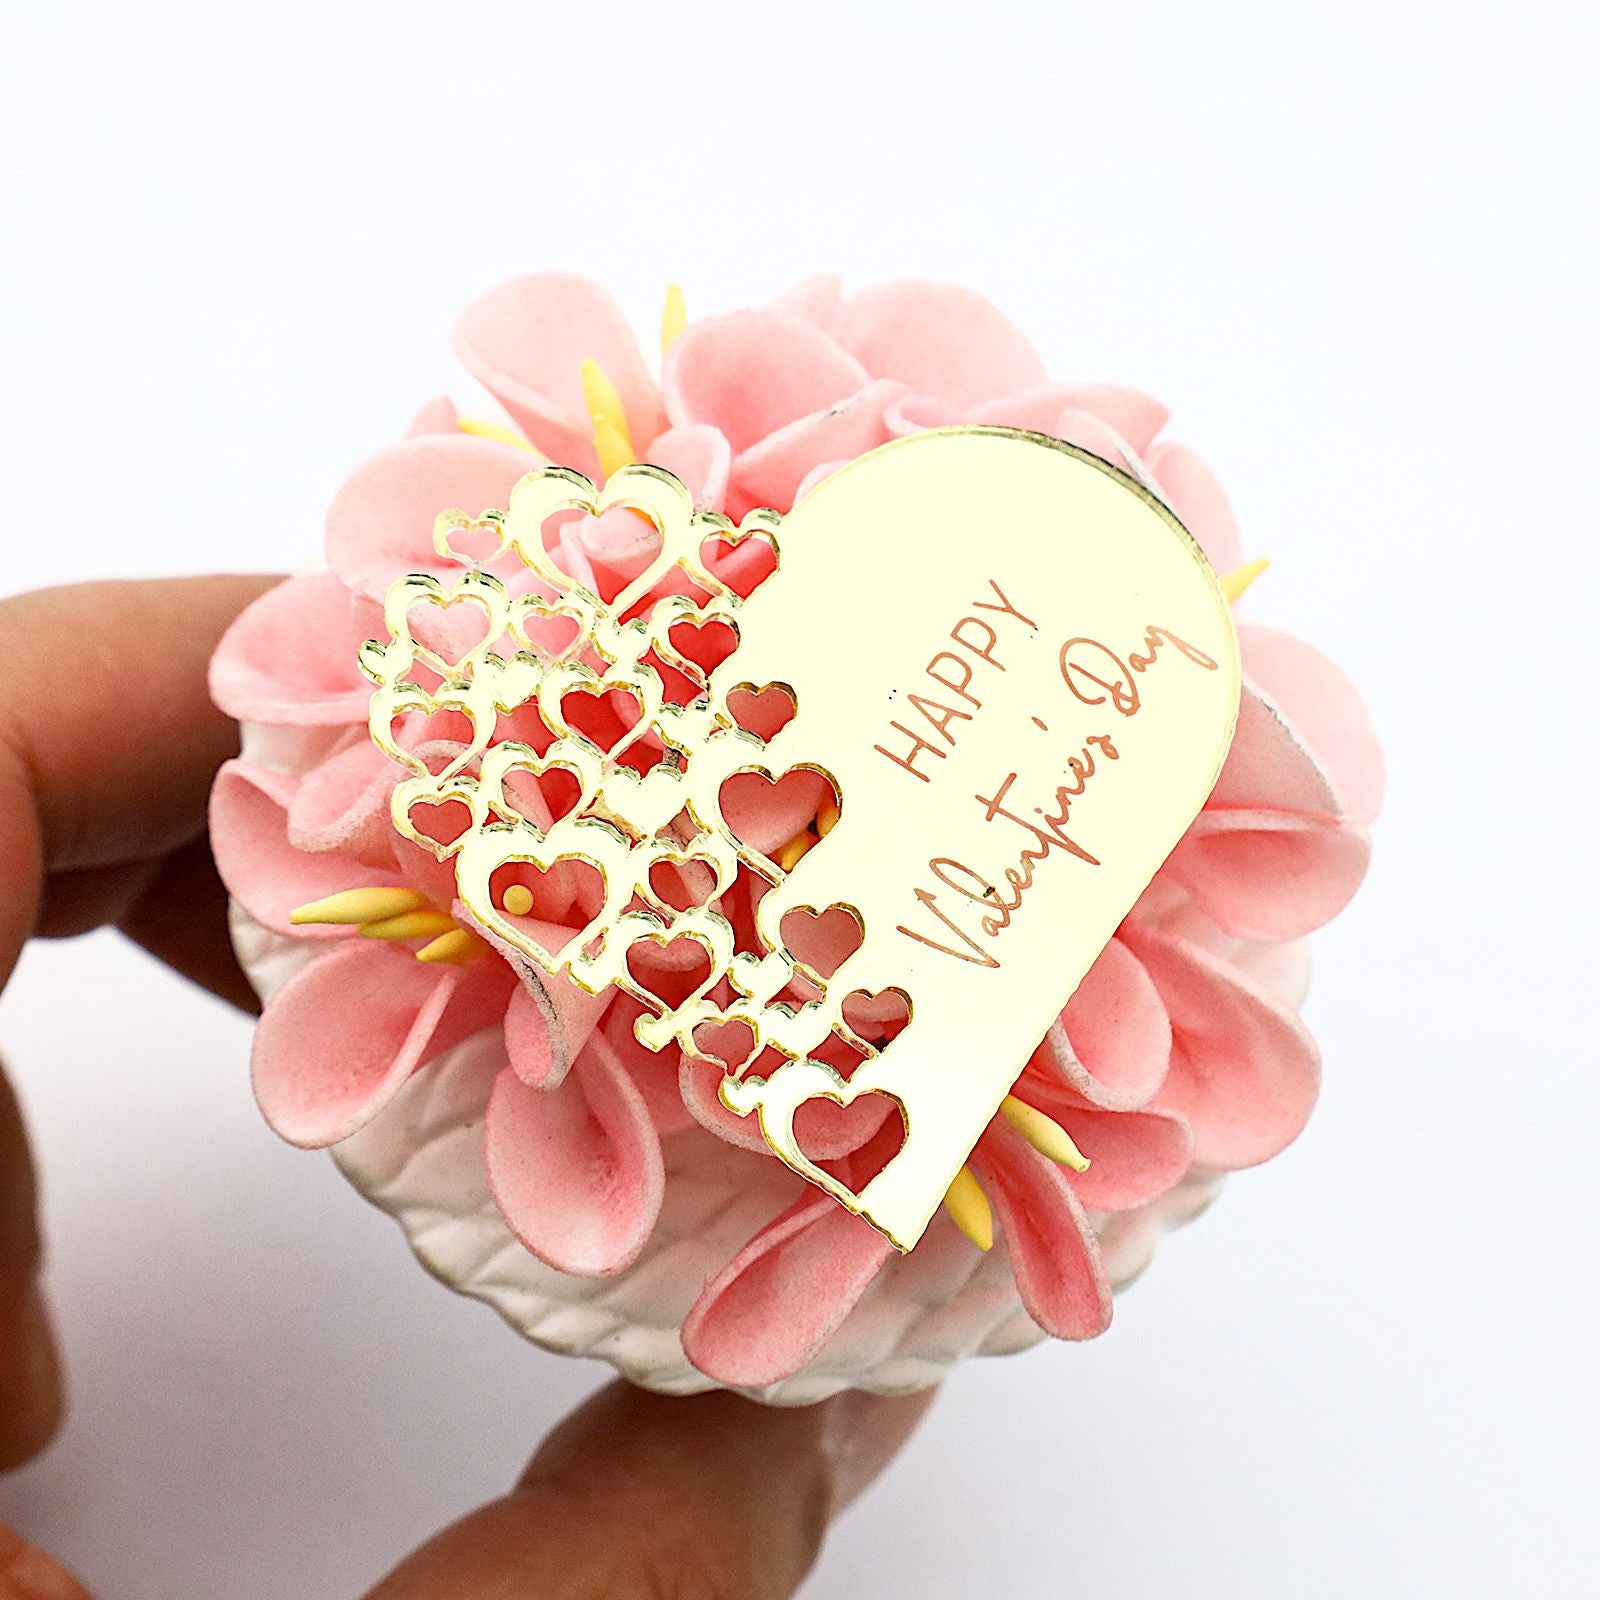 6x Happy Valentine's Day Cupcake Toppers Heart shaped Valentines toppers Love Valentine Toppers